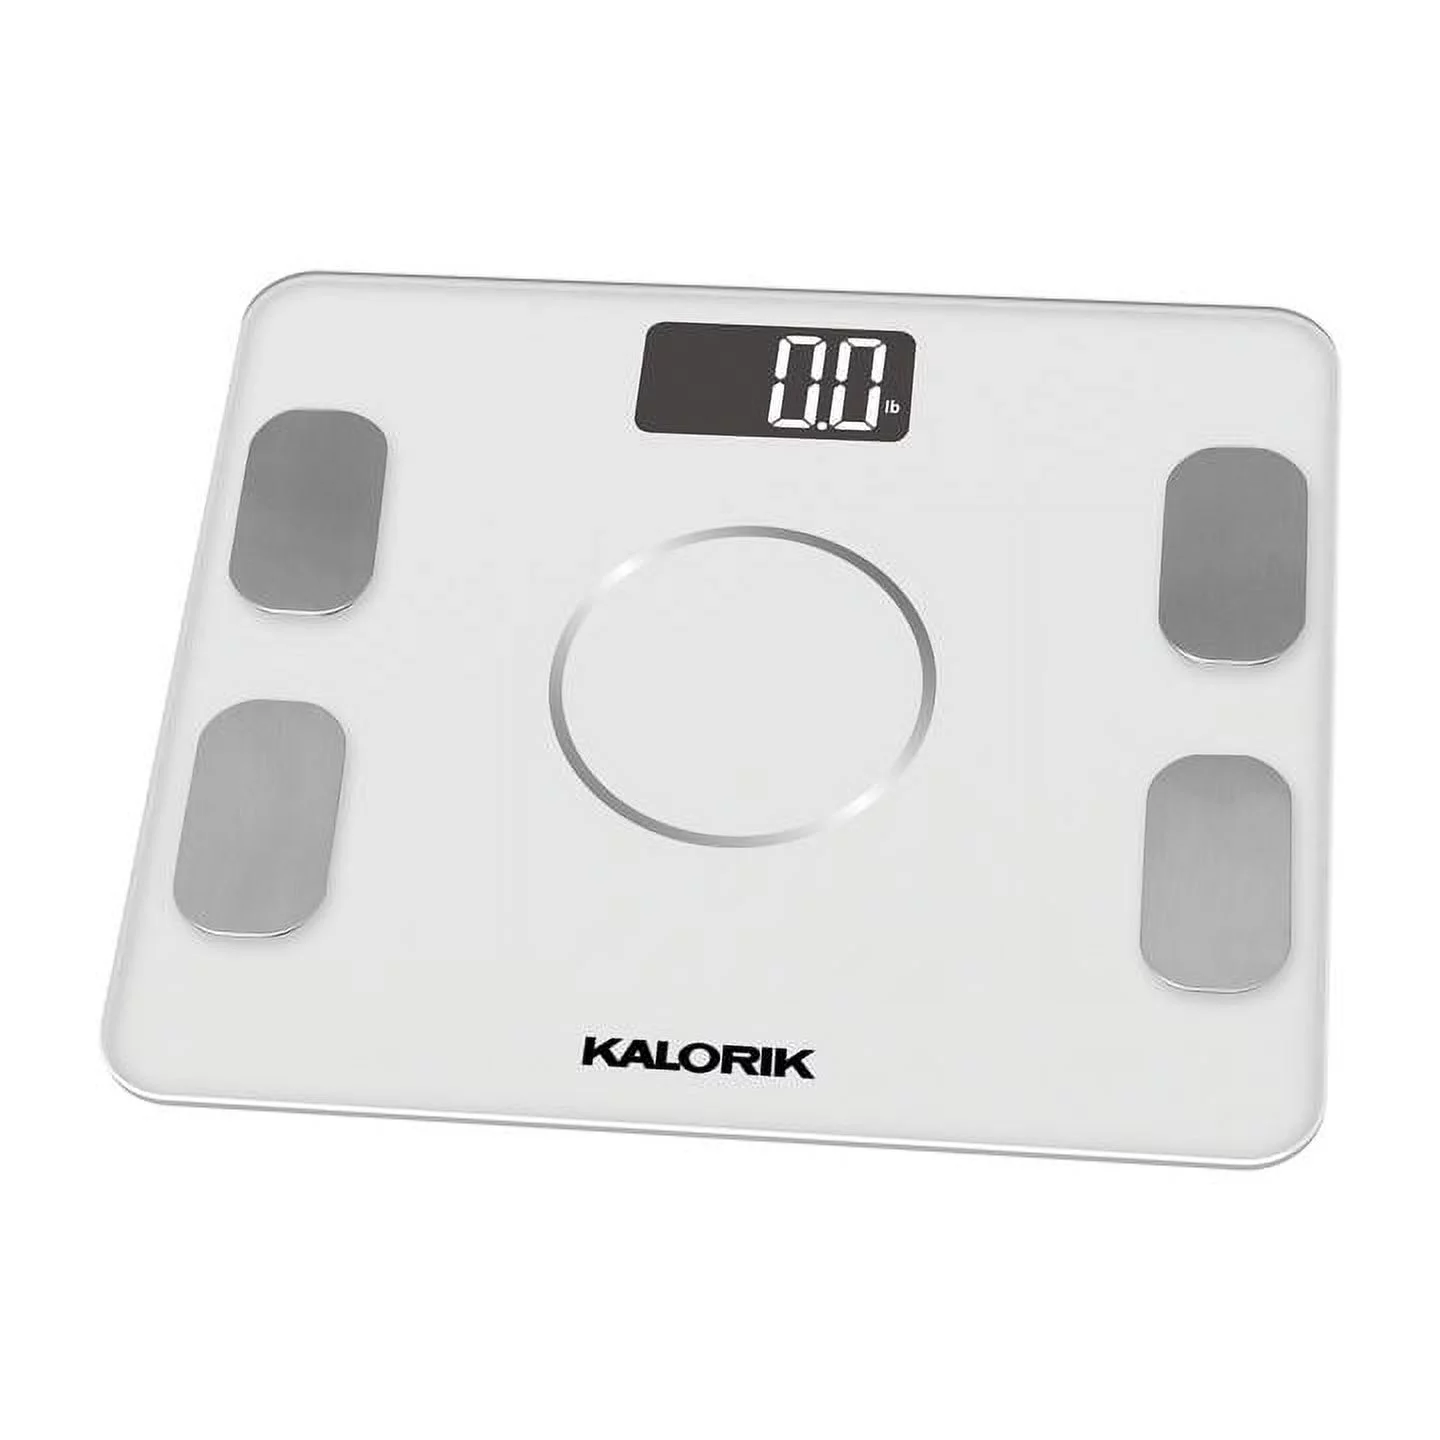 Home Smart Electronic Body Analysis Scale